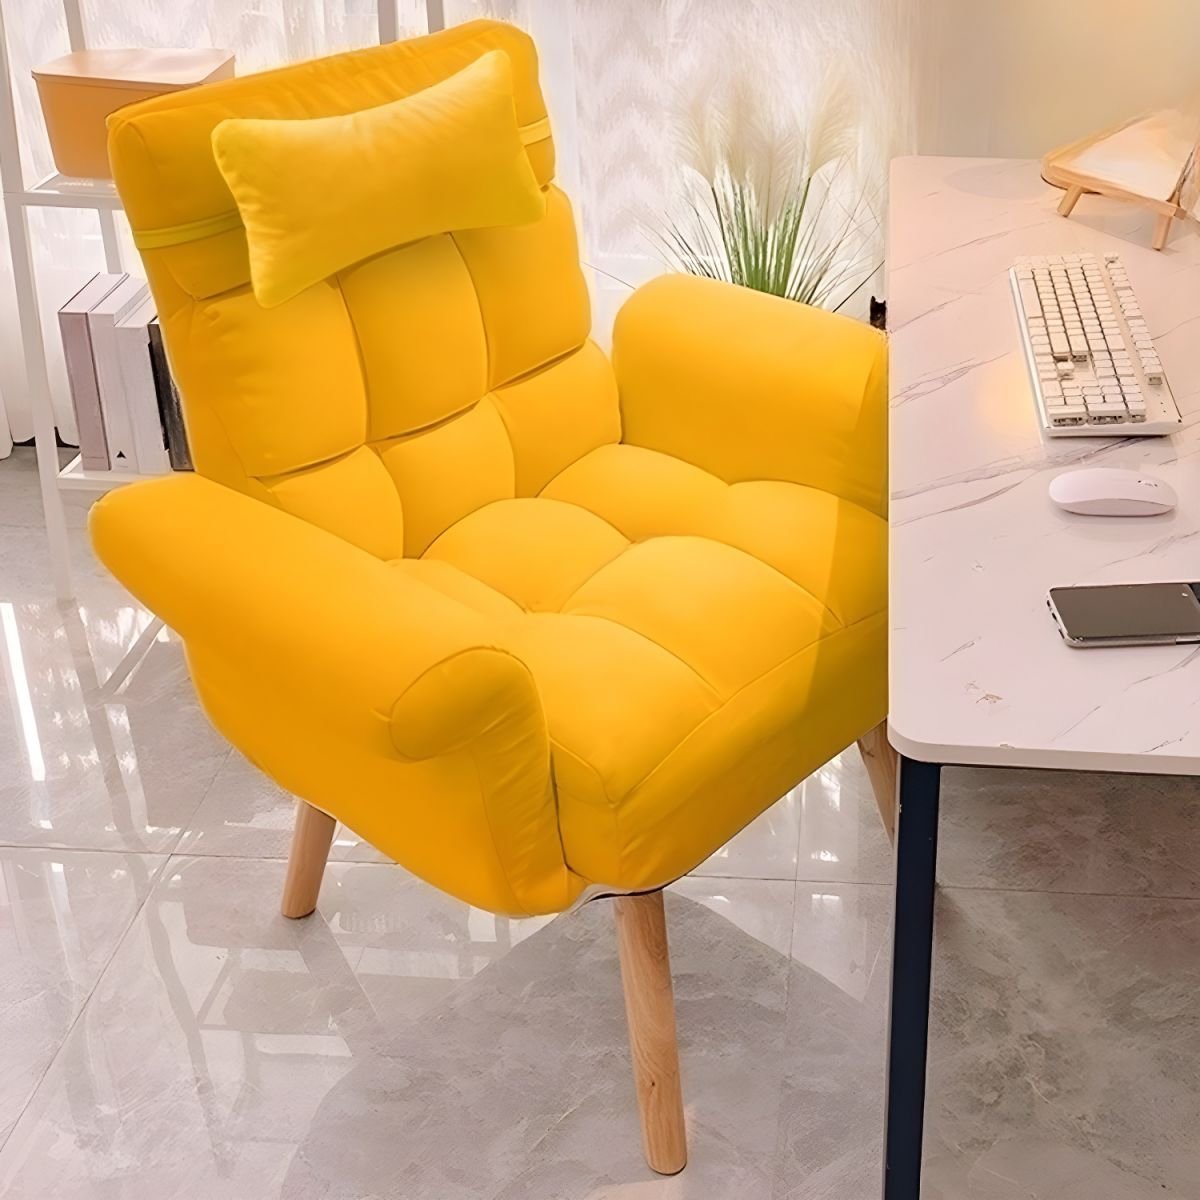 Yellow Cotton Modern Standard Recliner Manual - Push Back with Ottoman and Partial Assembly Required - 35"L x 24"W x 36"H Yellow Deck Chair